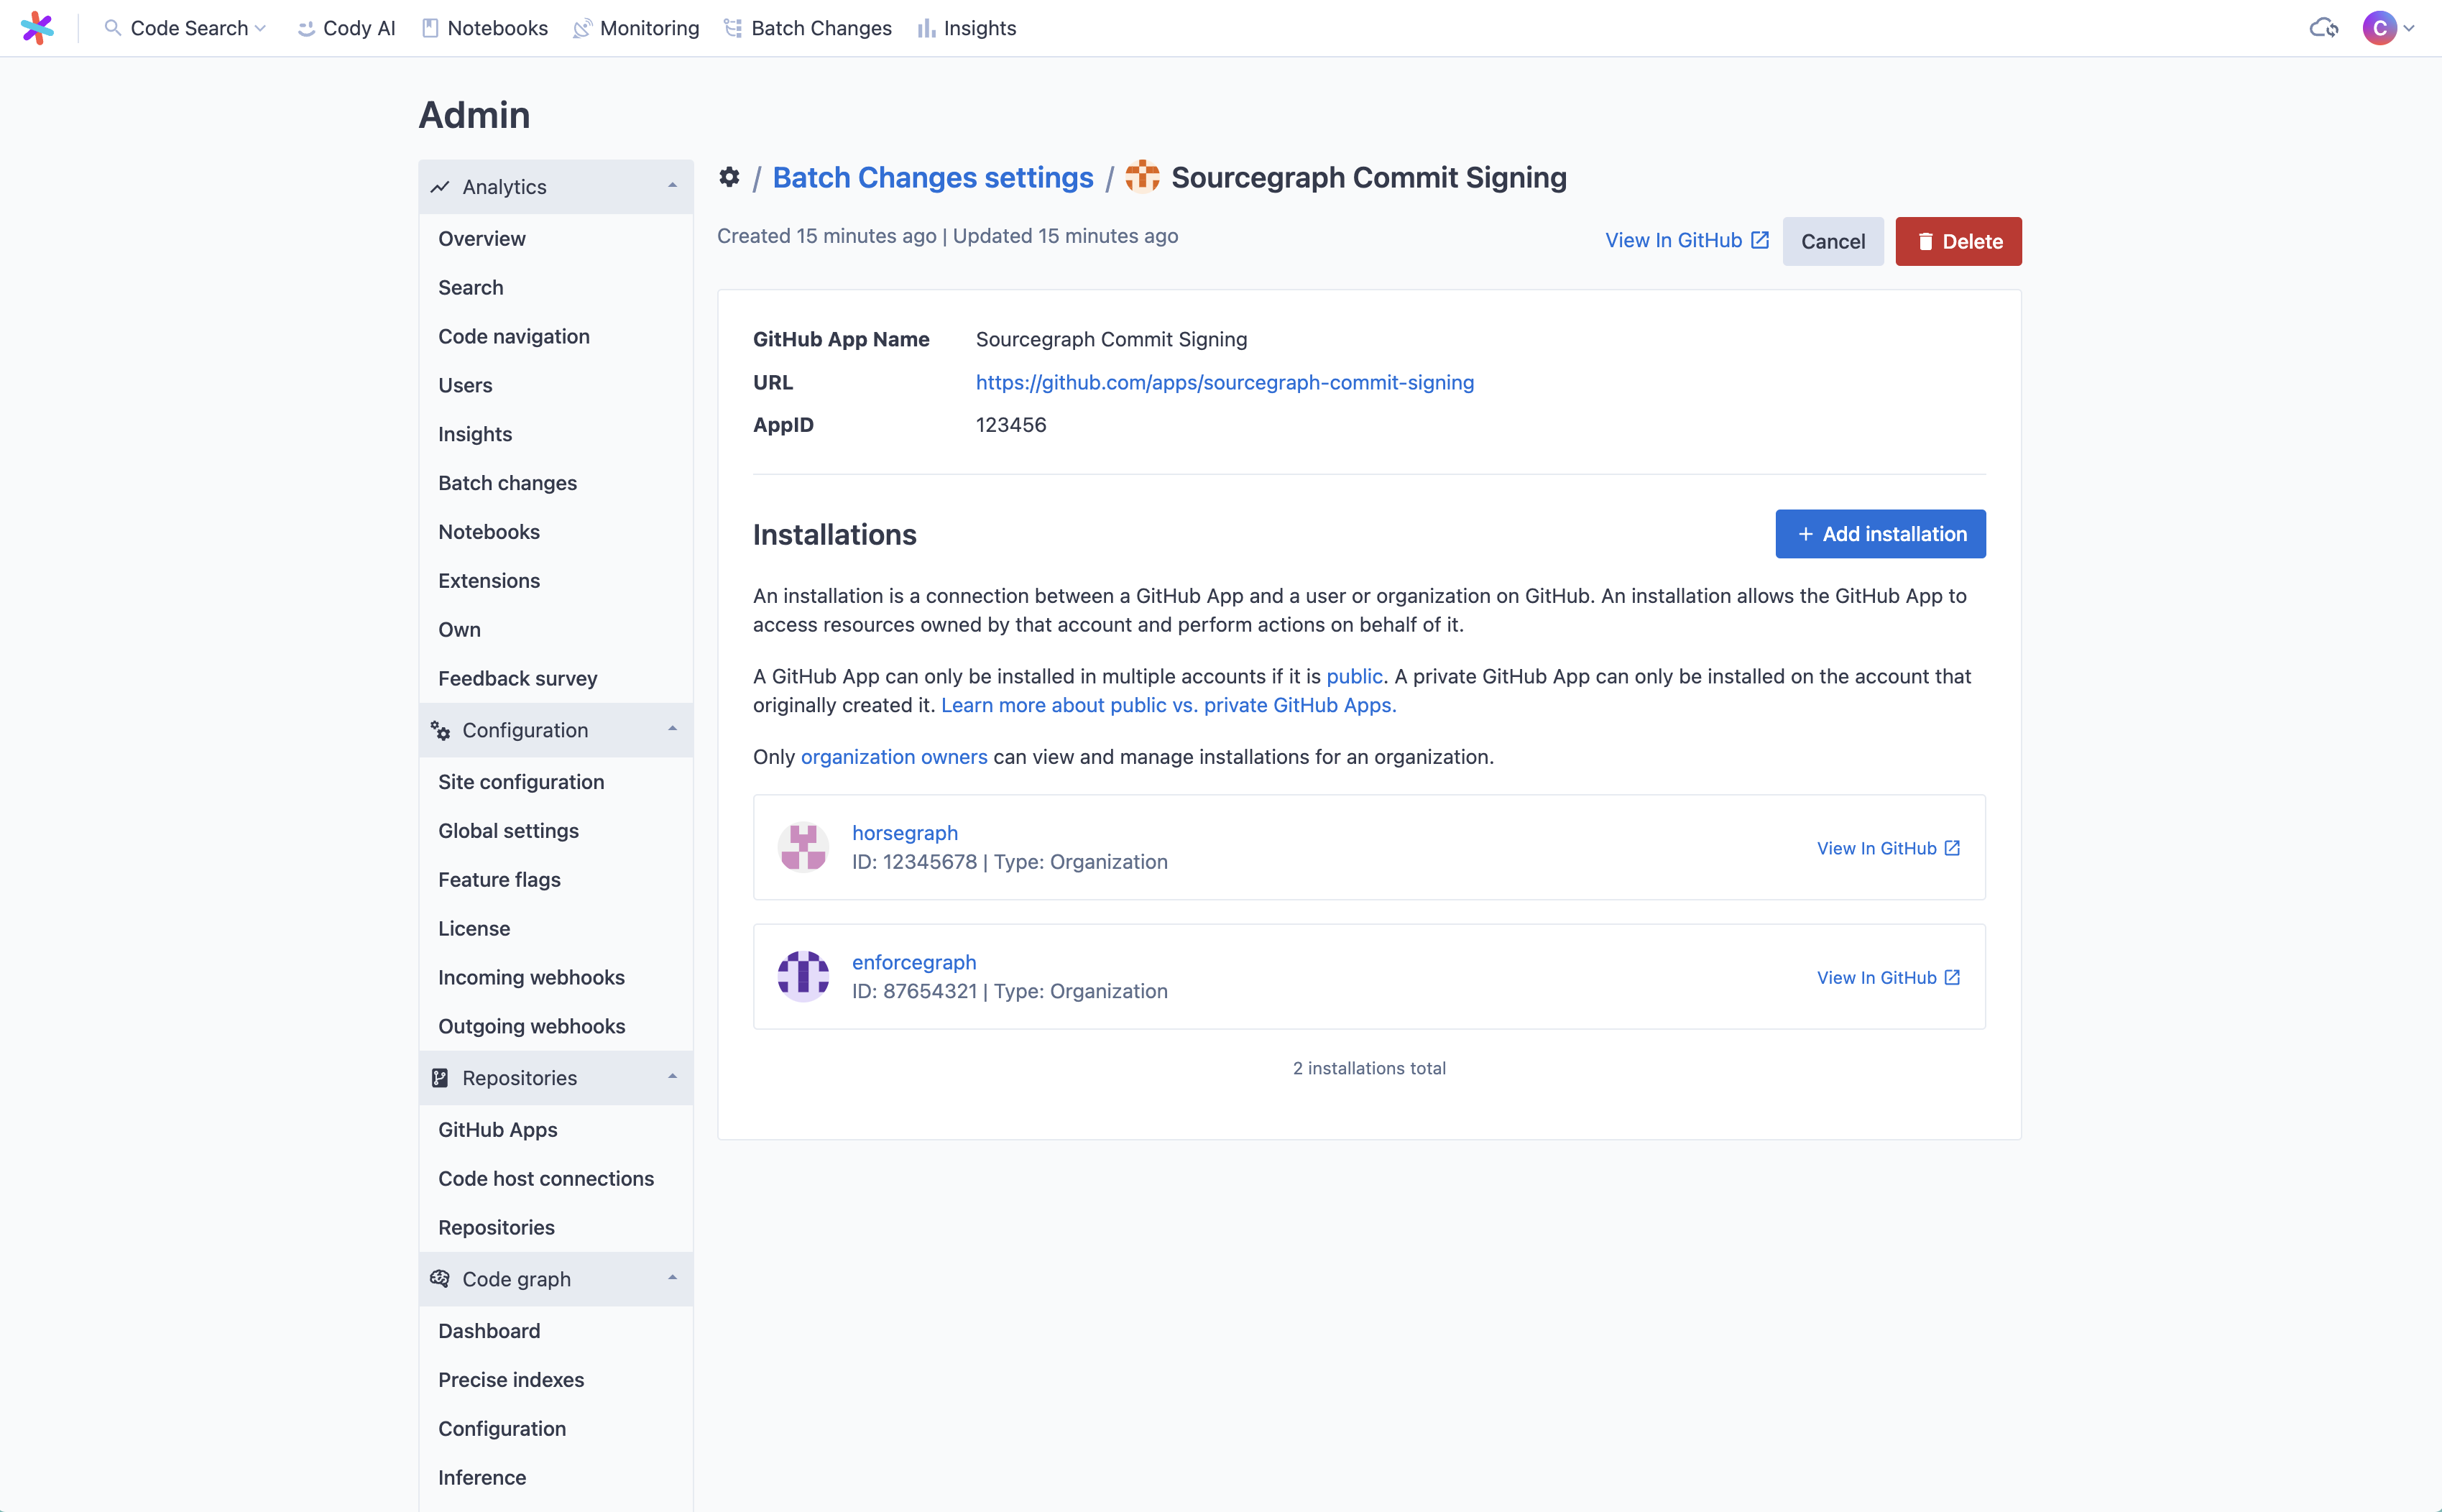 The GitHub App details page on Sourcegraph, scrolled to show a second new installation